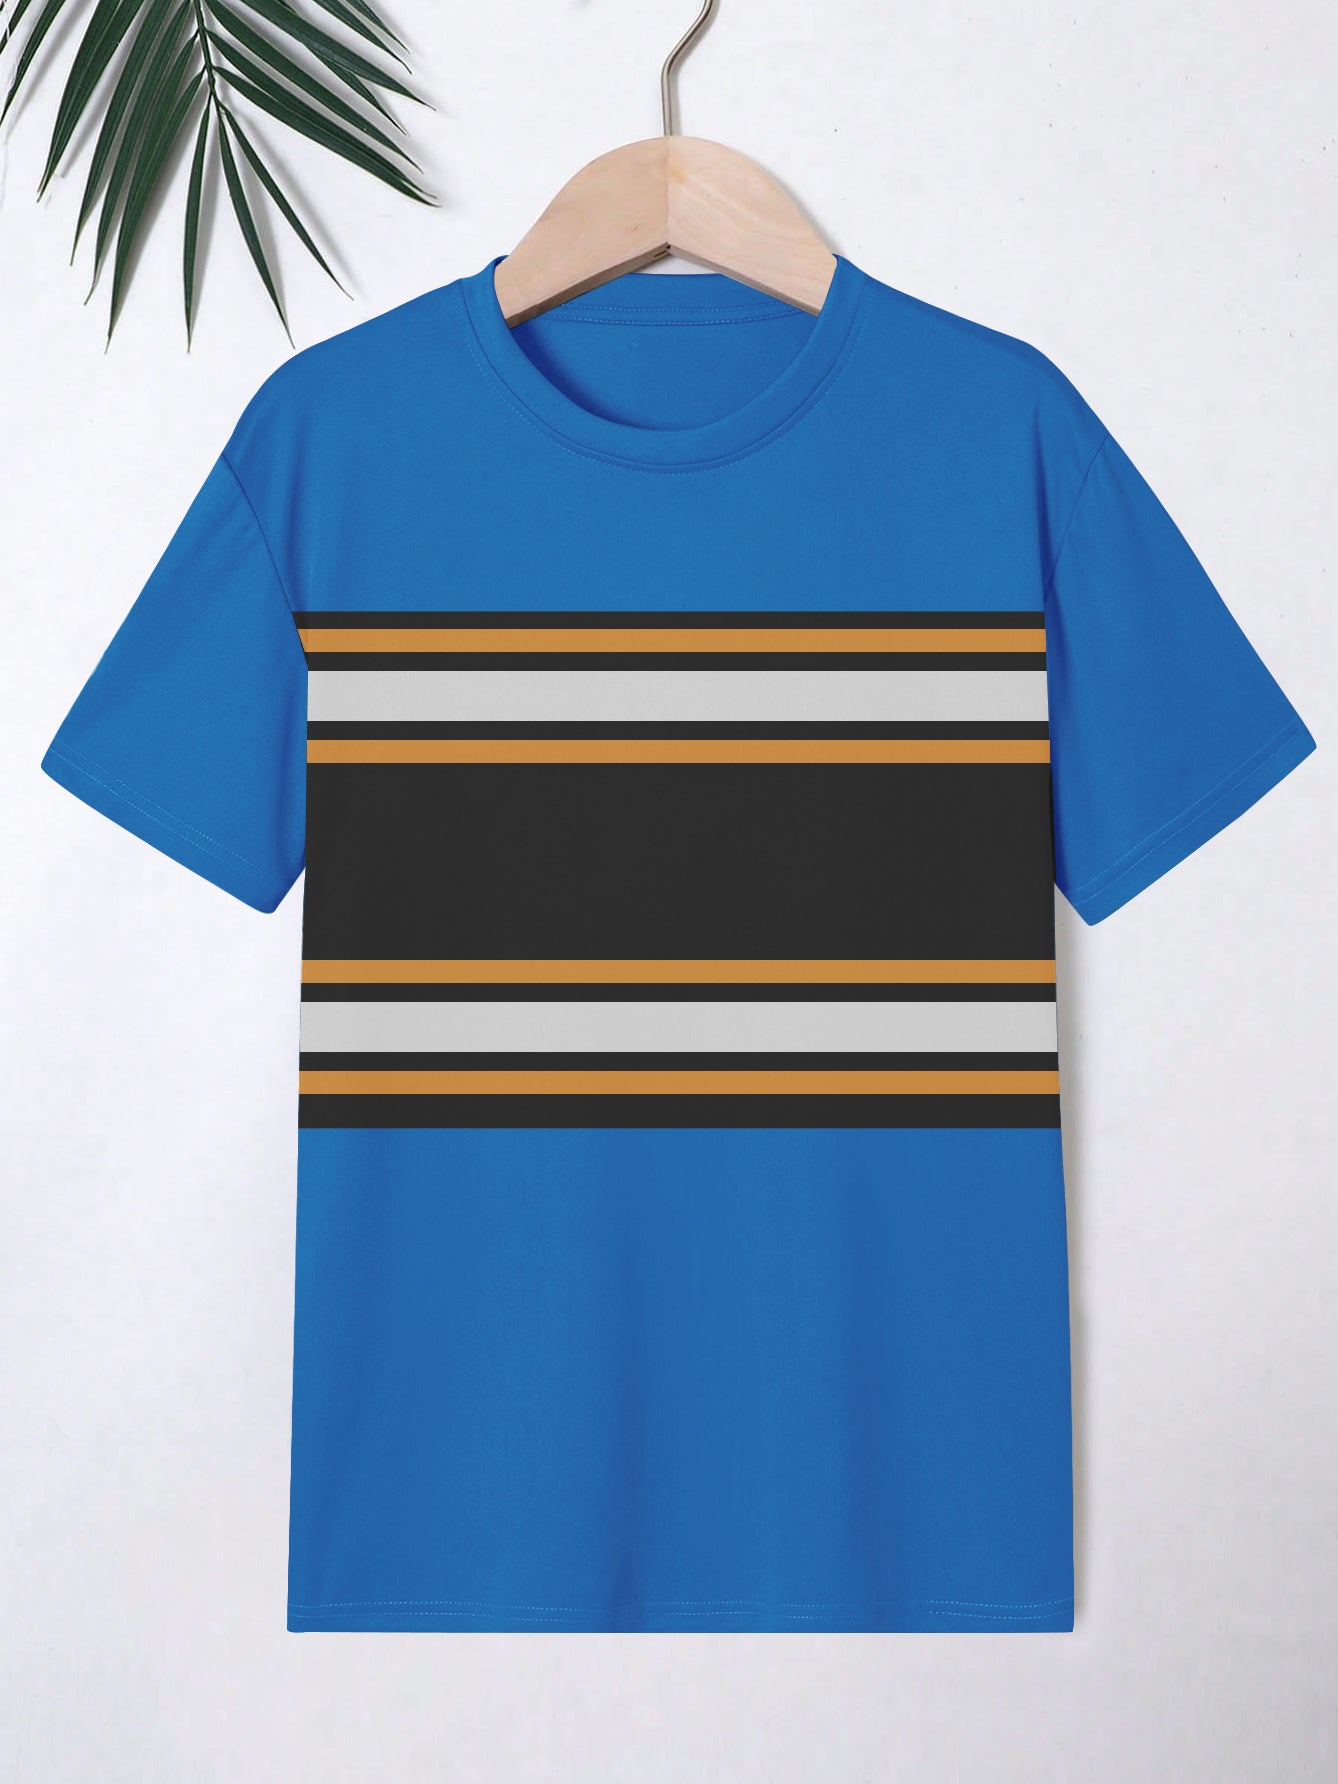 NXT Crew Neck Single Jersey Tee Shirt For Kids-Blue with Black Panel & Stripes-SP2228